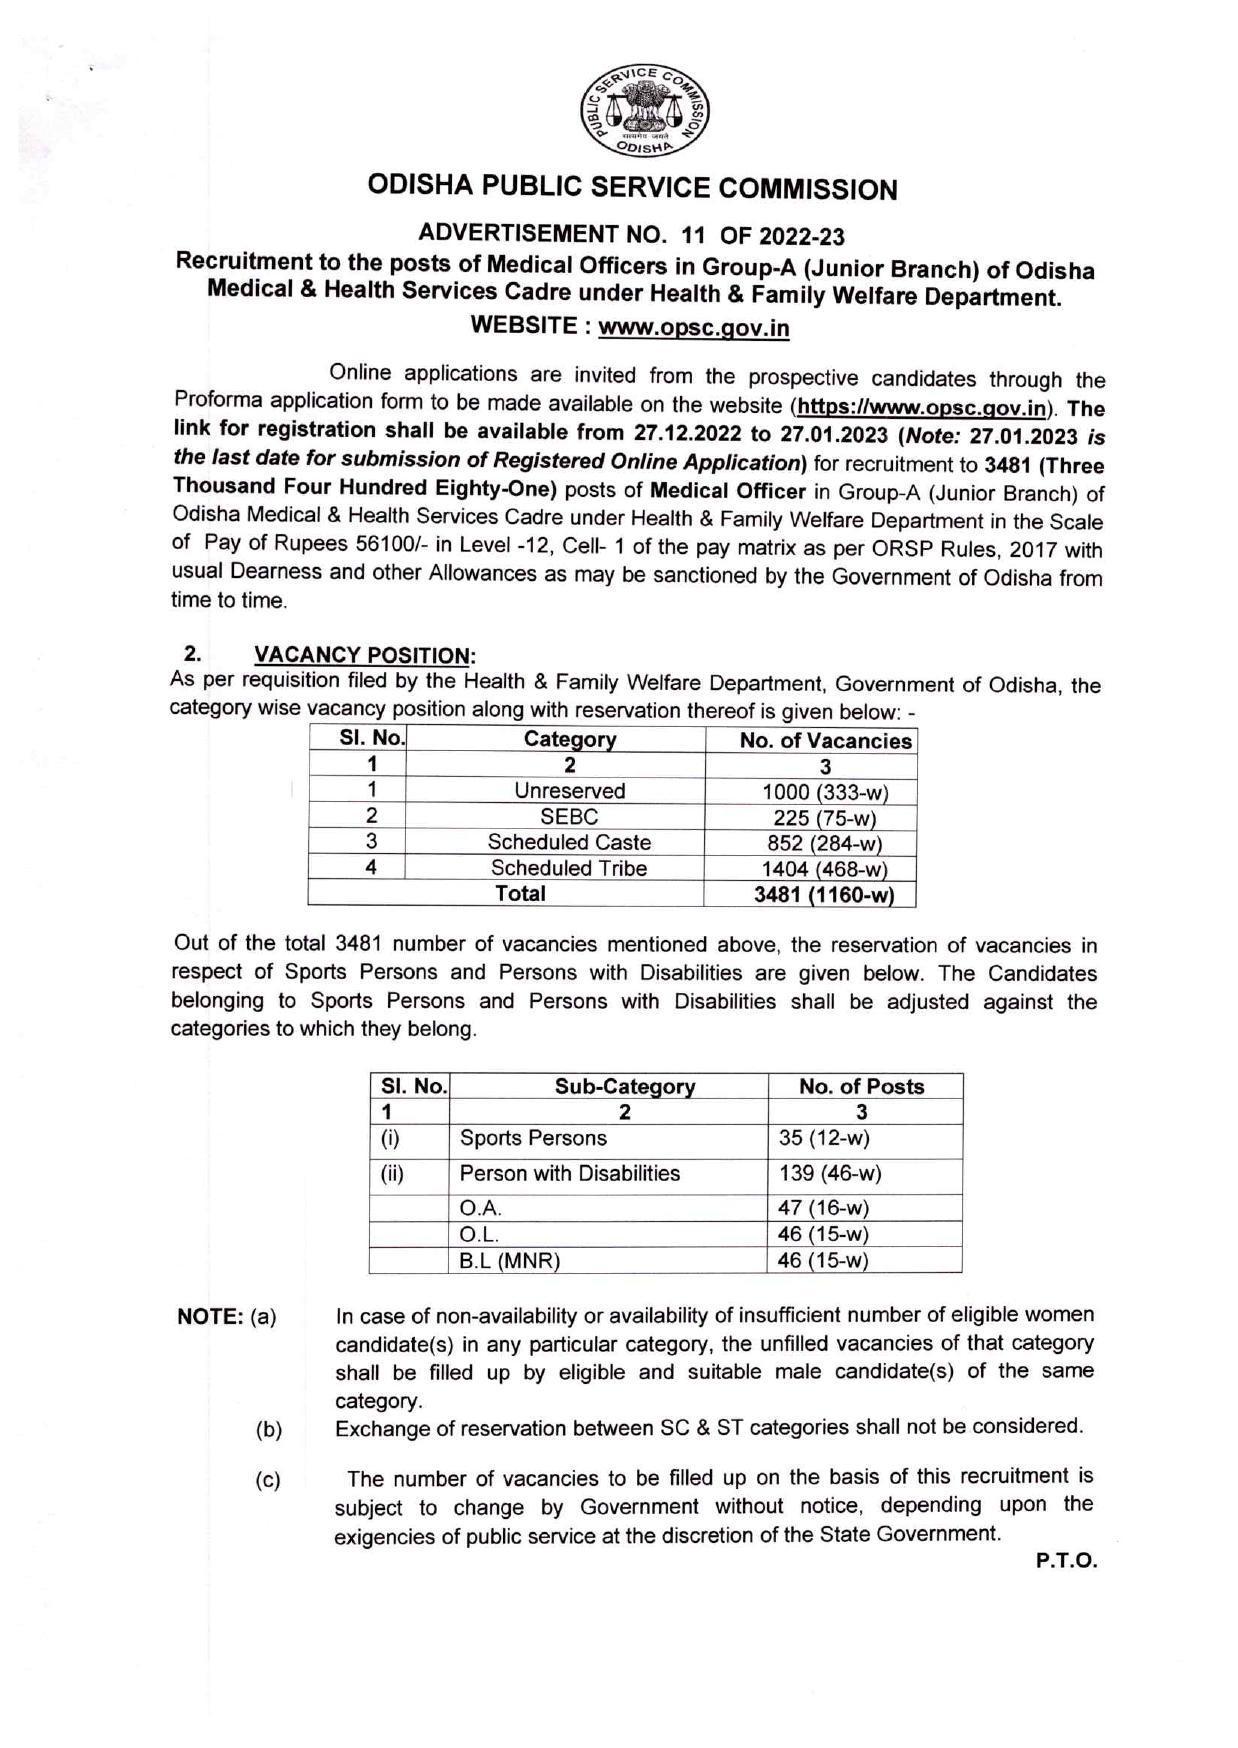 OPSC Invites Application for 3481 Medical Officer Recruitment 2022 - Page 5